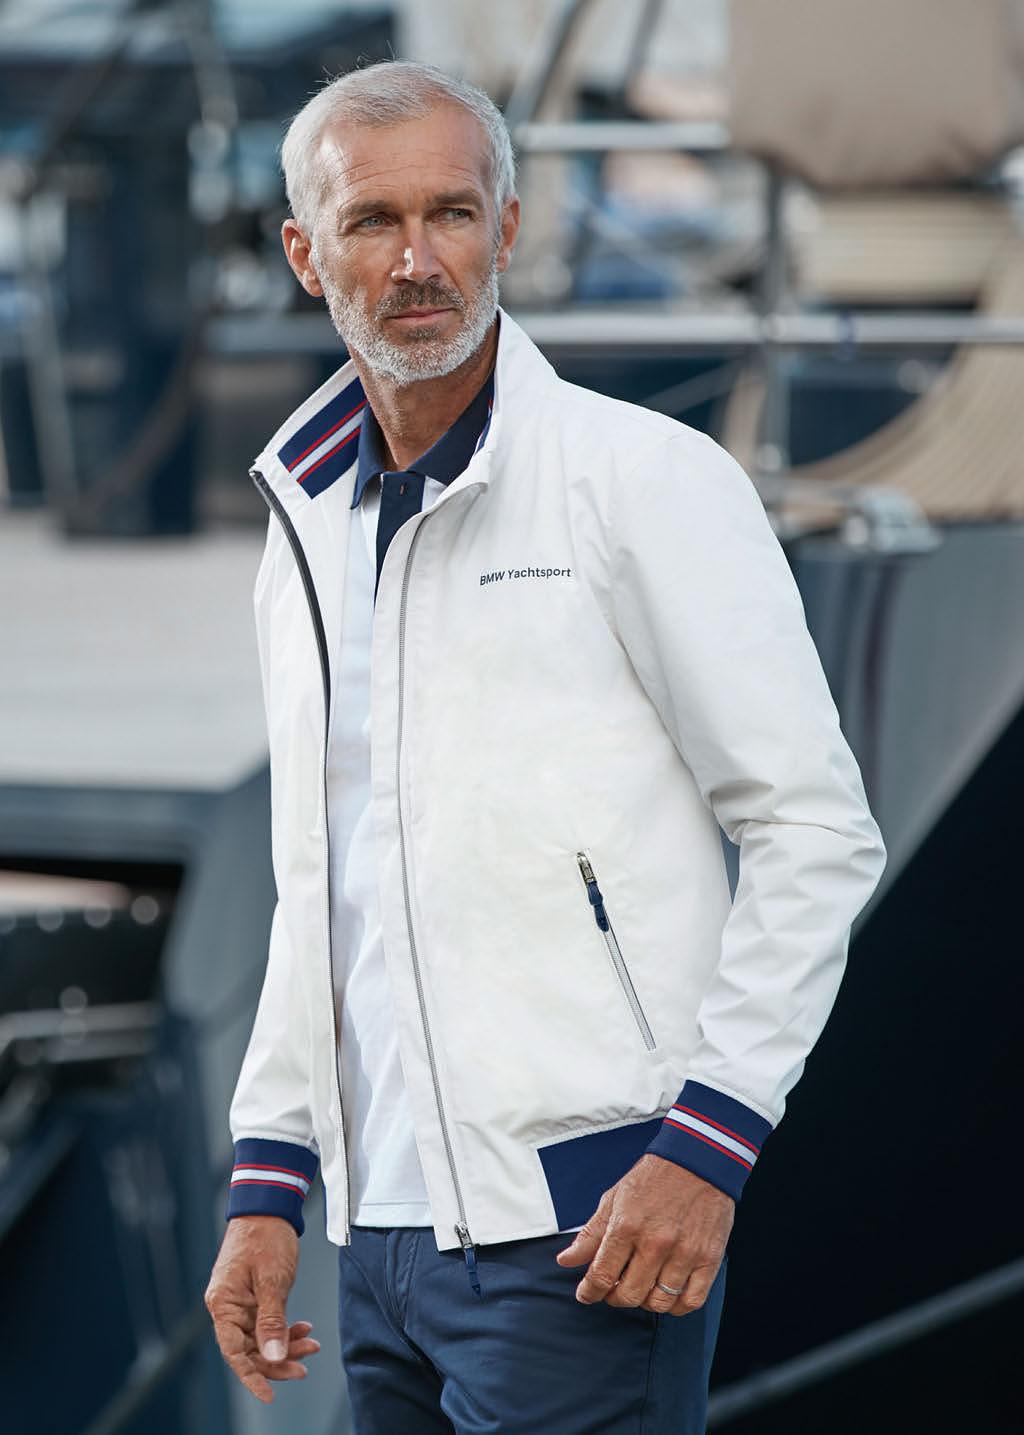 Every item from the BMW Yachtsport Collection embodies the